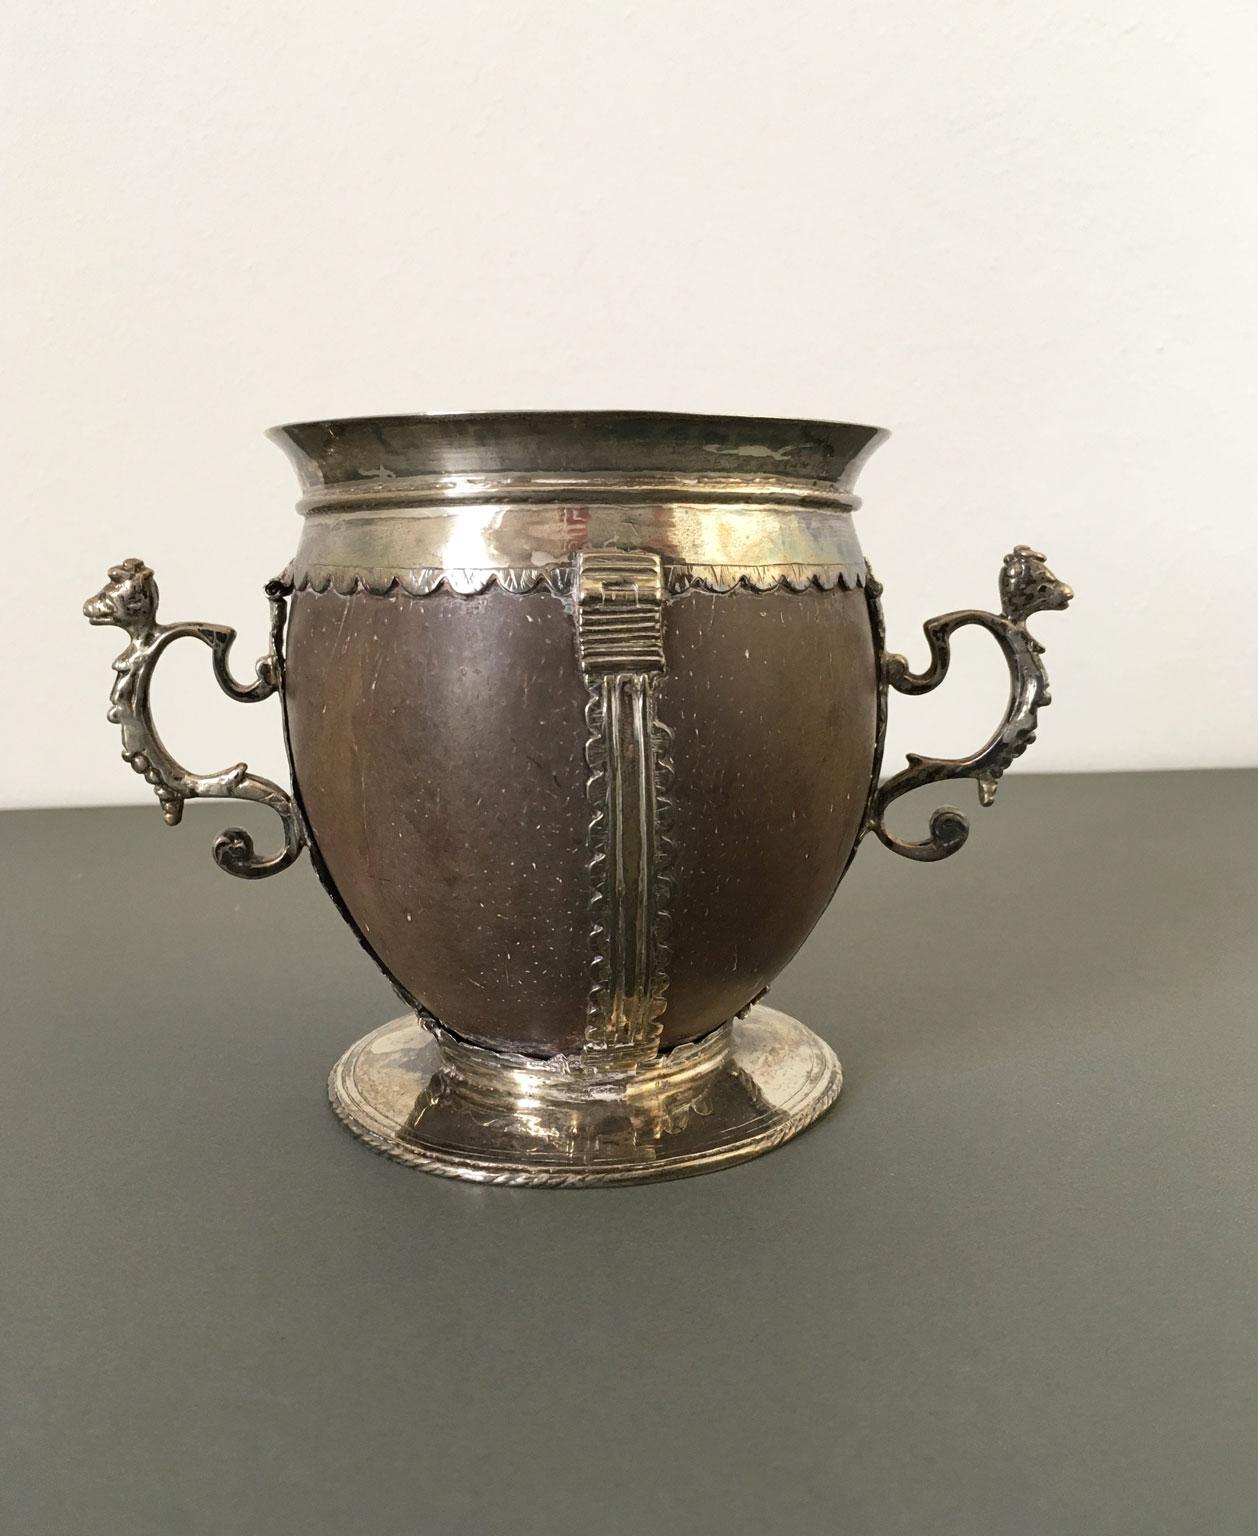 Cups in coconut such as this are especially uncommon and rarely appear on the world's art market. This is a very interesting piece for its fine and rich craftmenships metal silver decor, handmade in Early 18th century in the North part of Europe,